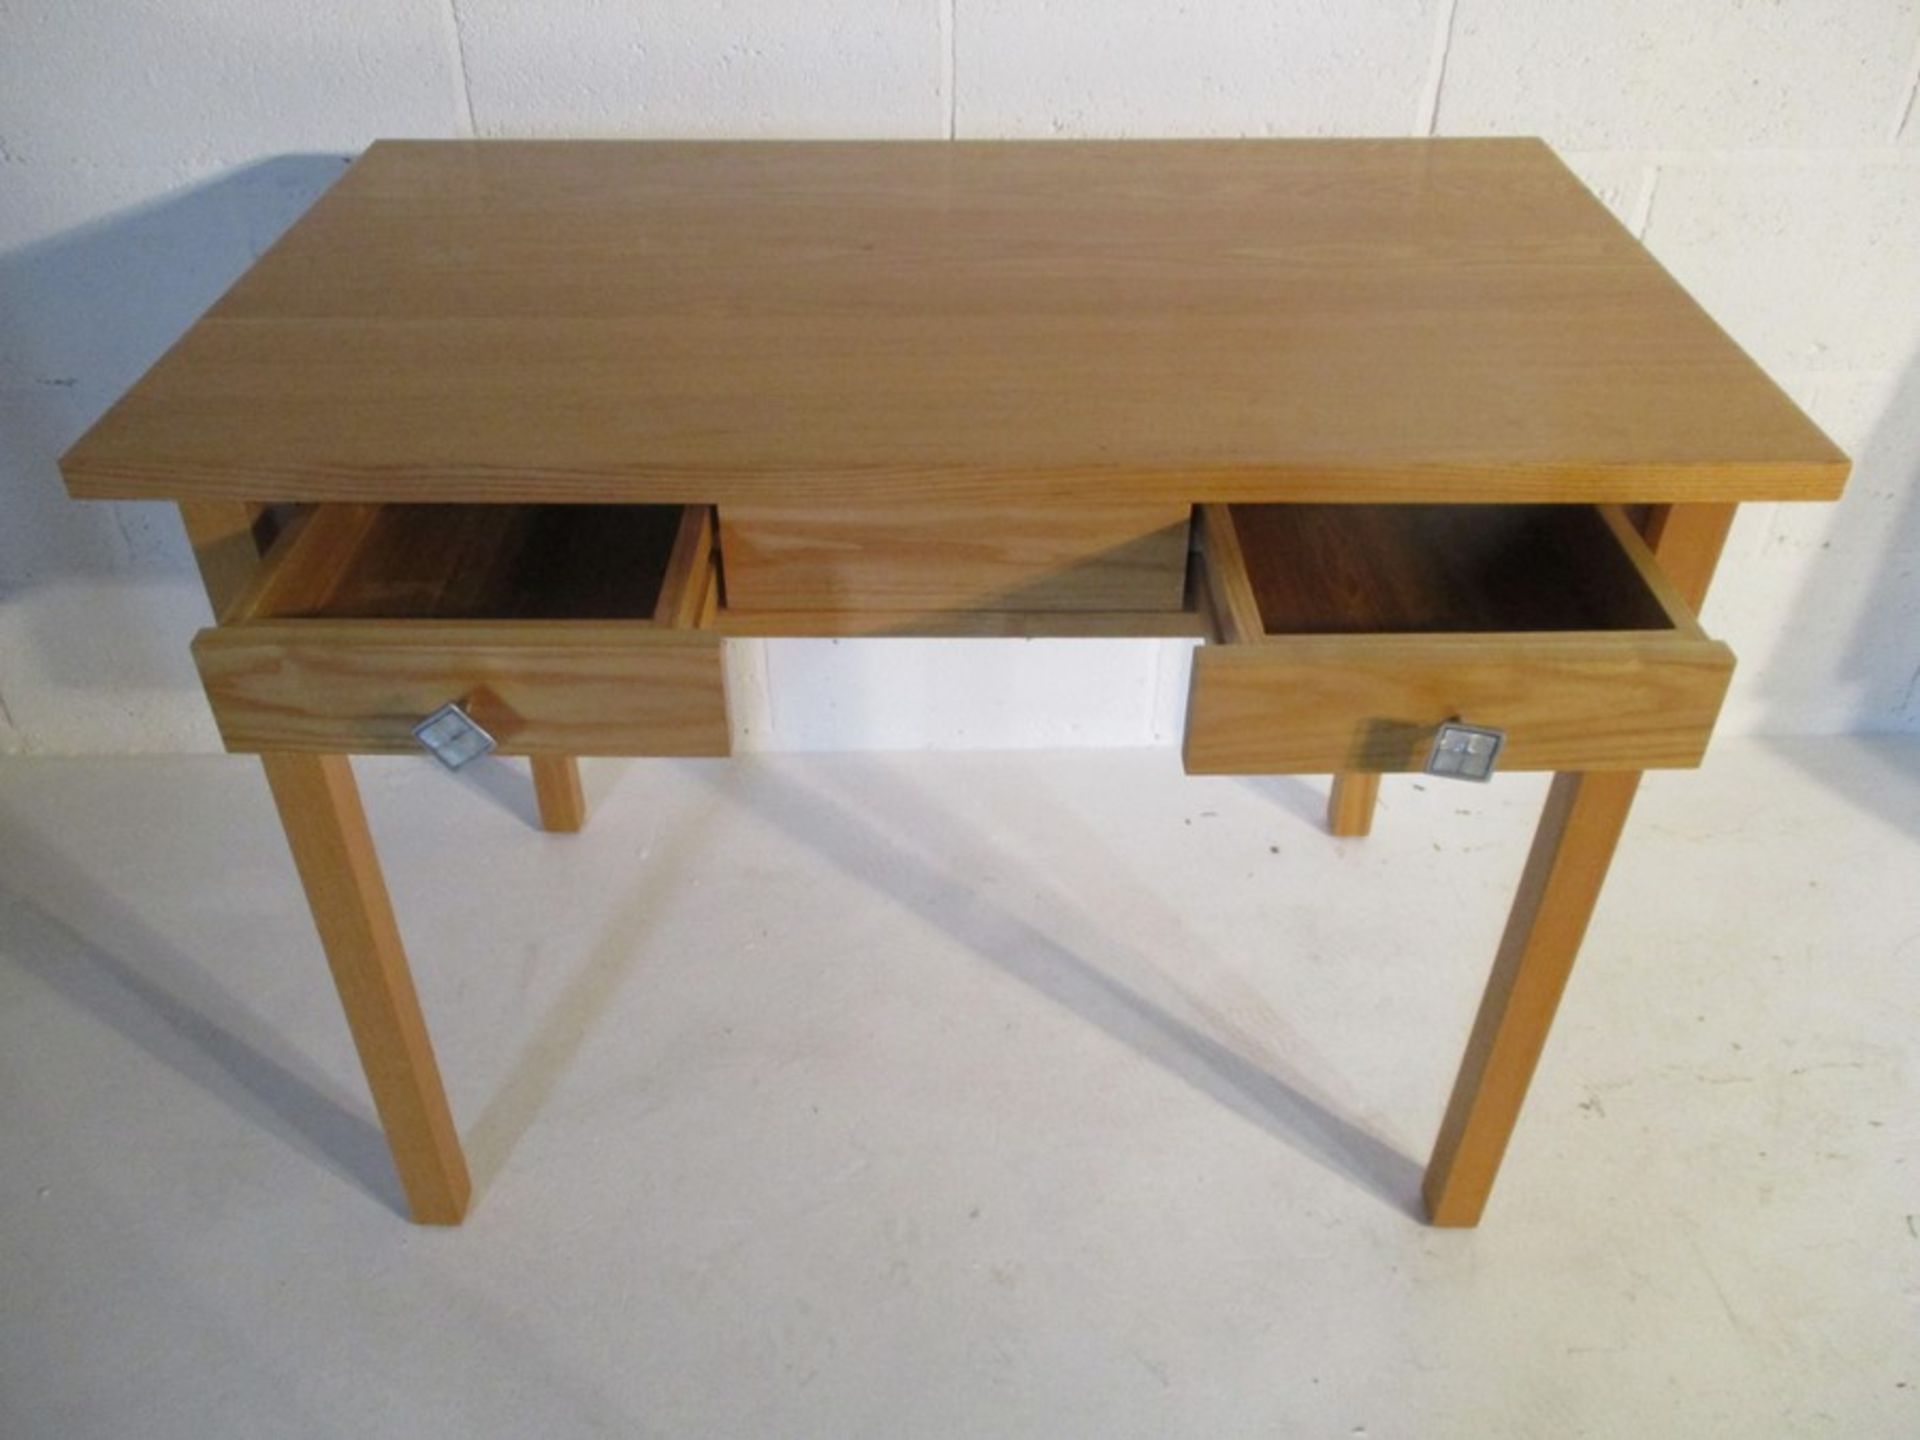 A modern light oak table with two small drawers - Bild 5 aus 8